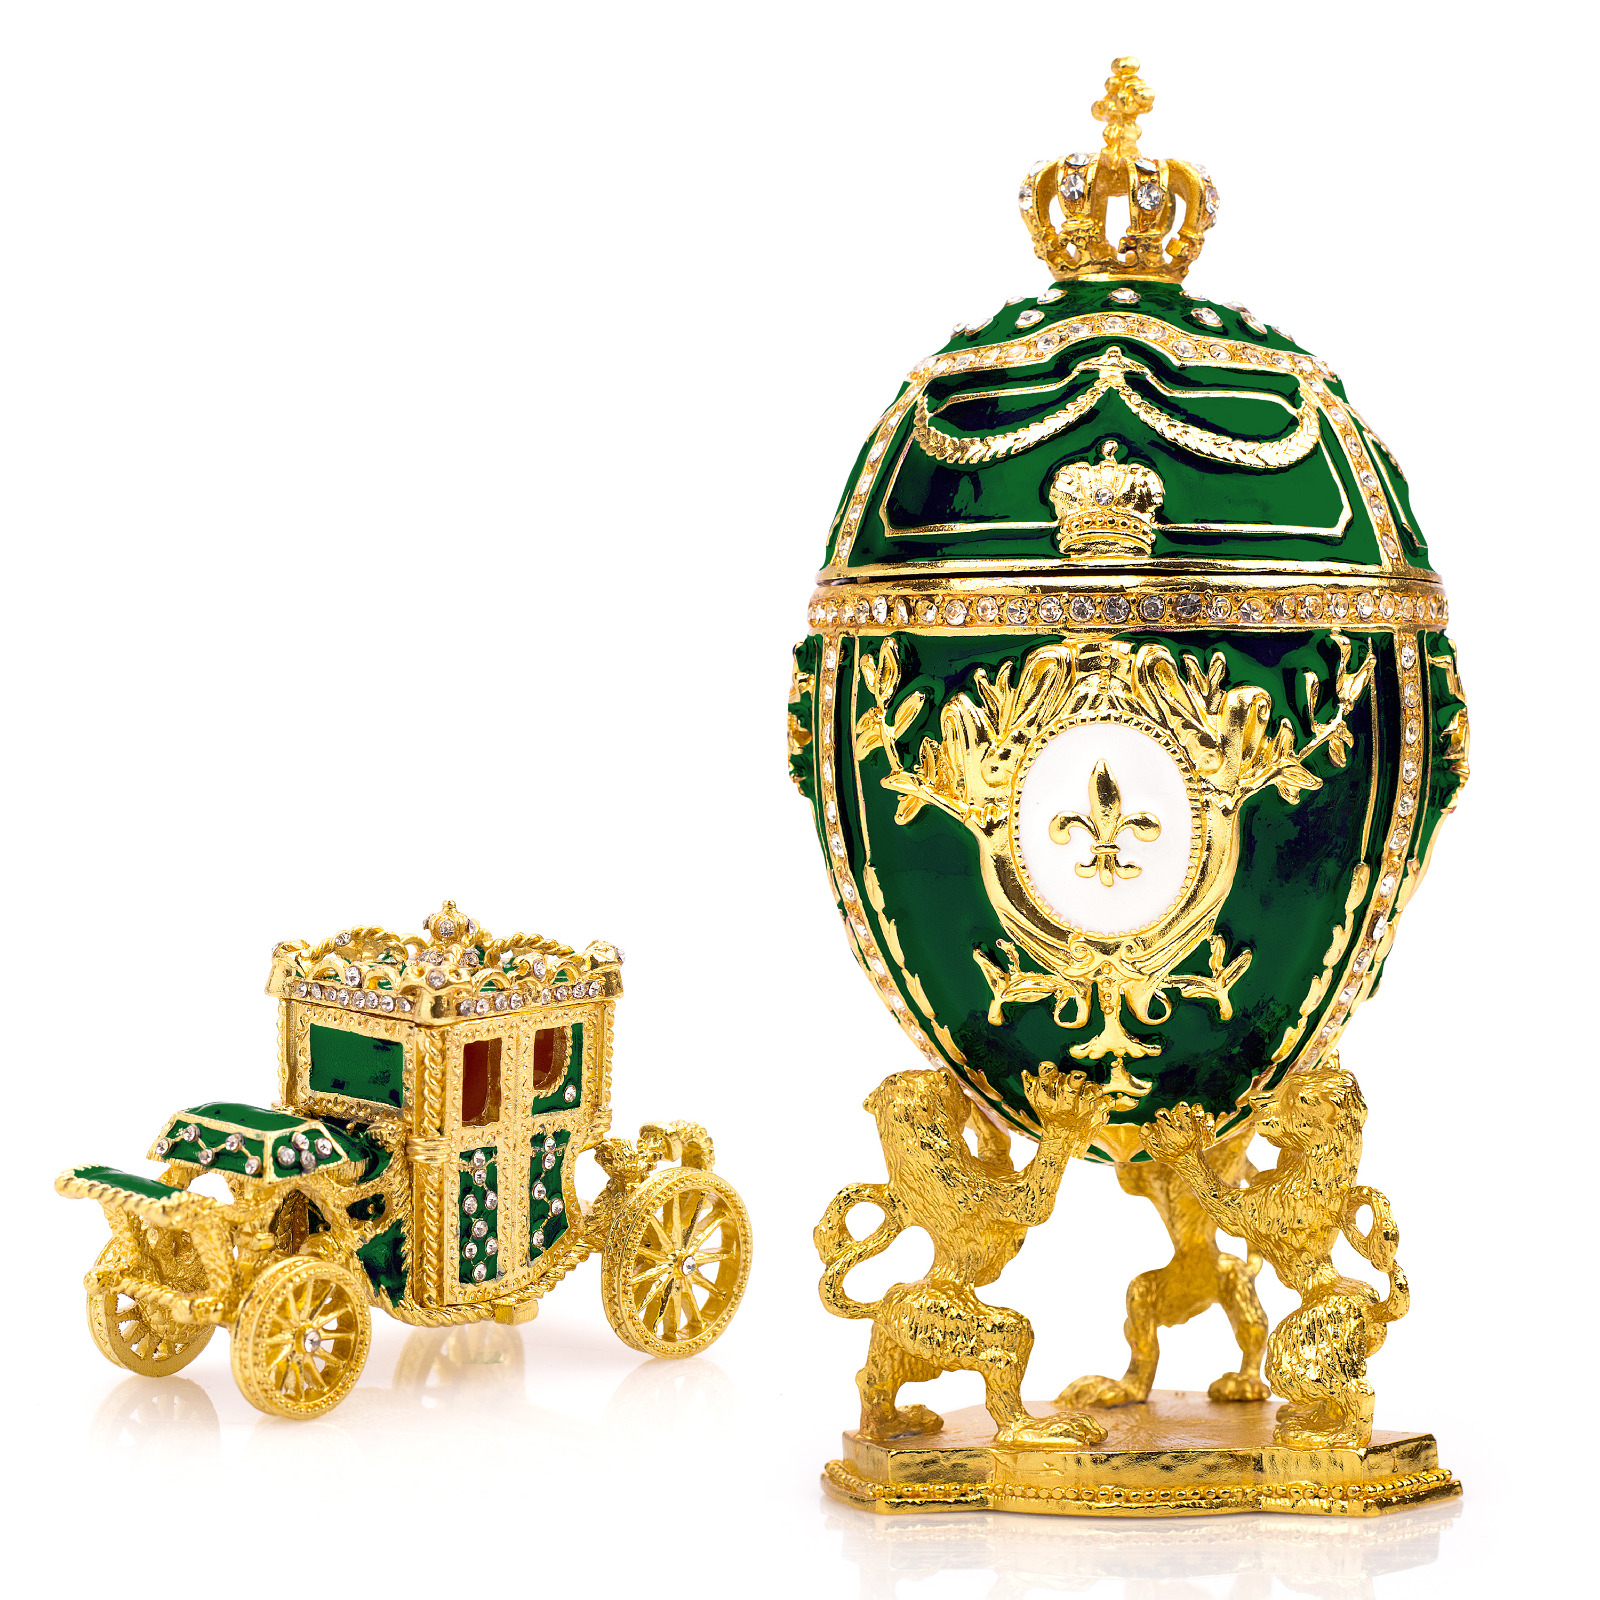 Royal Imperial Green Faberge Egg Replica: Large 6.6 inch + Carriage by Vtry